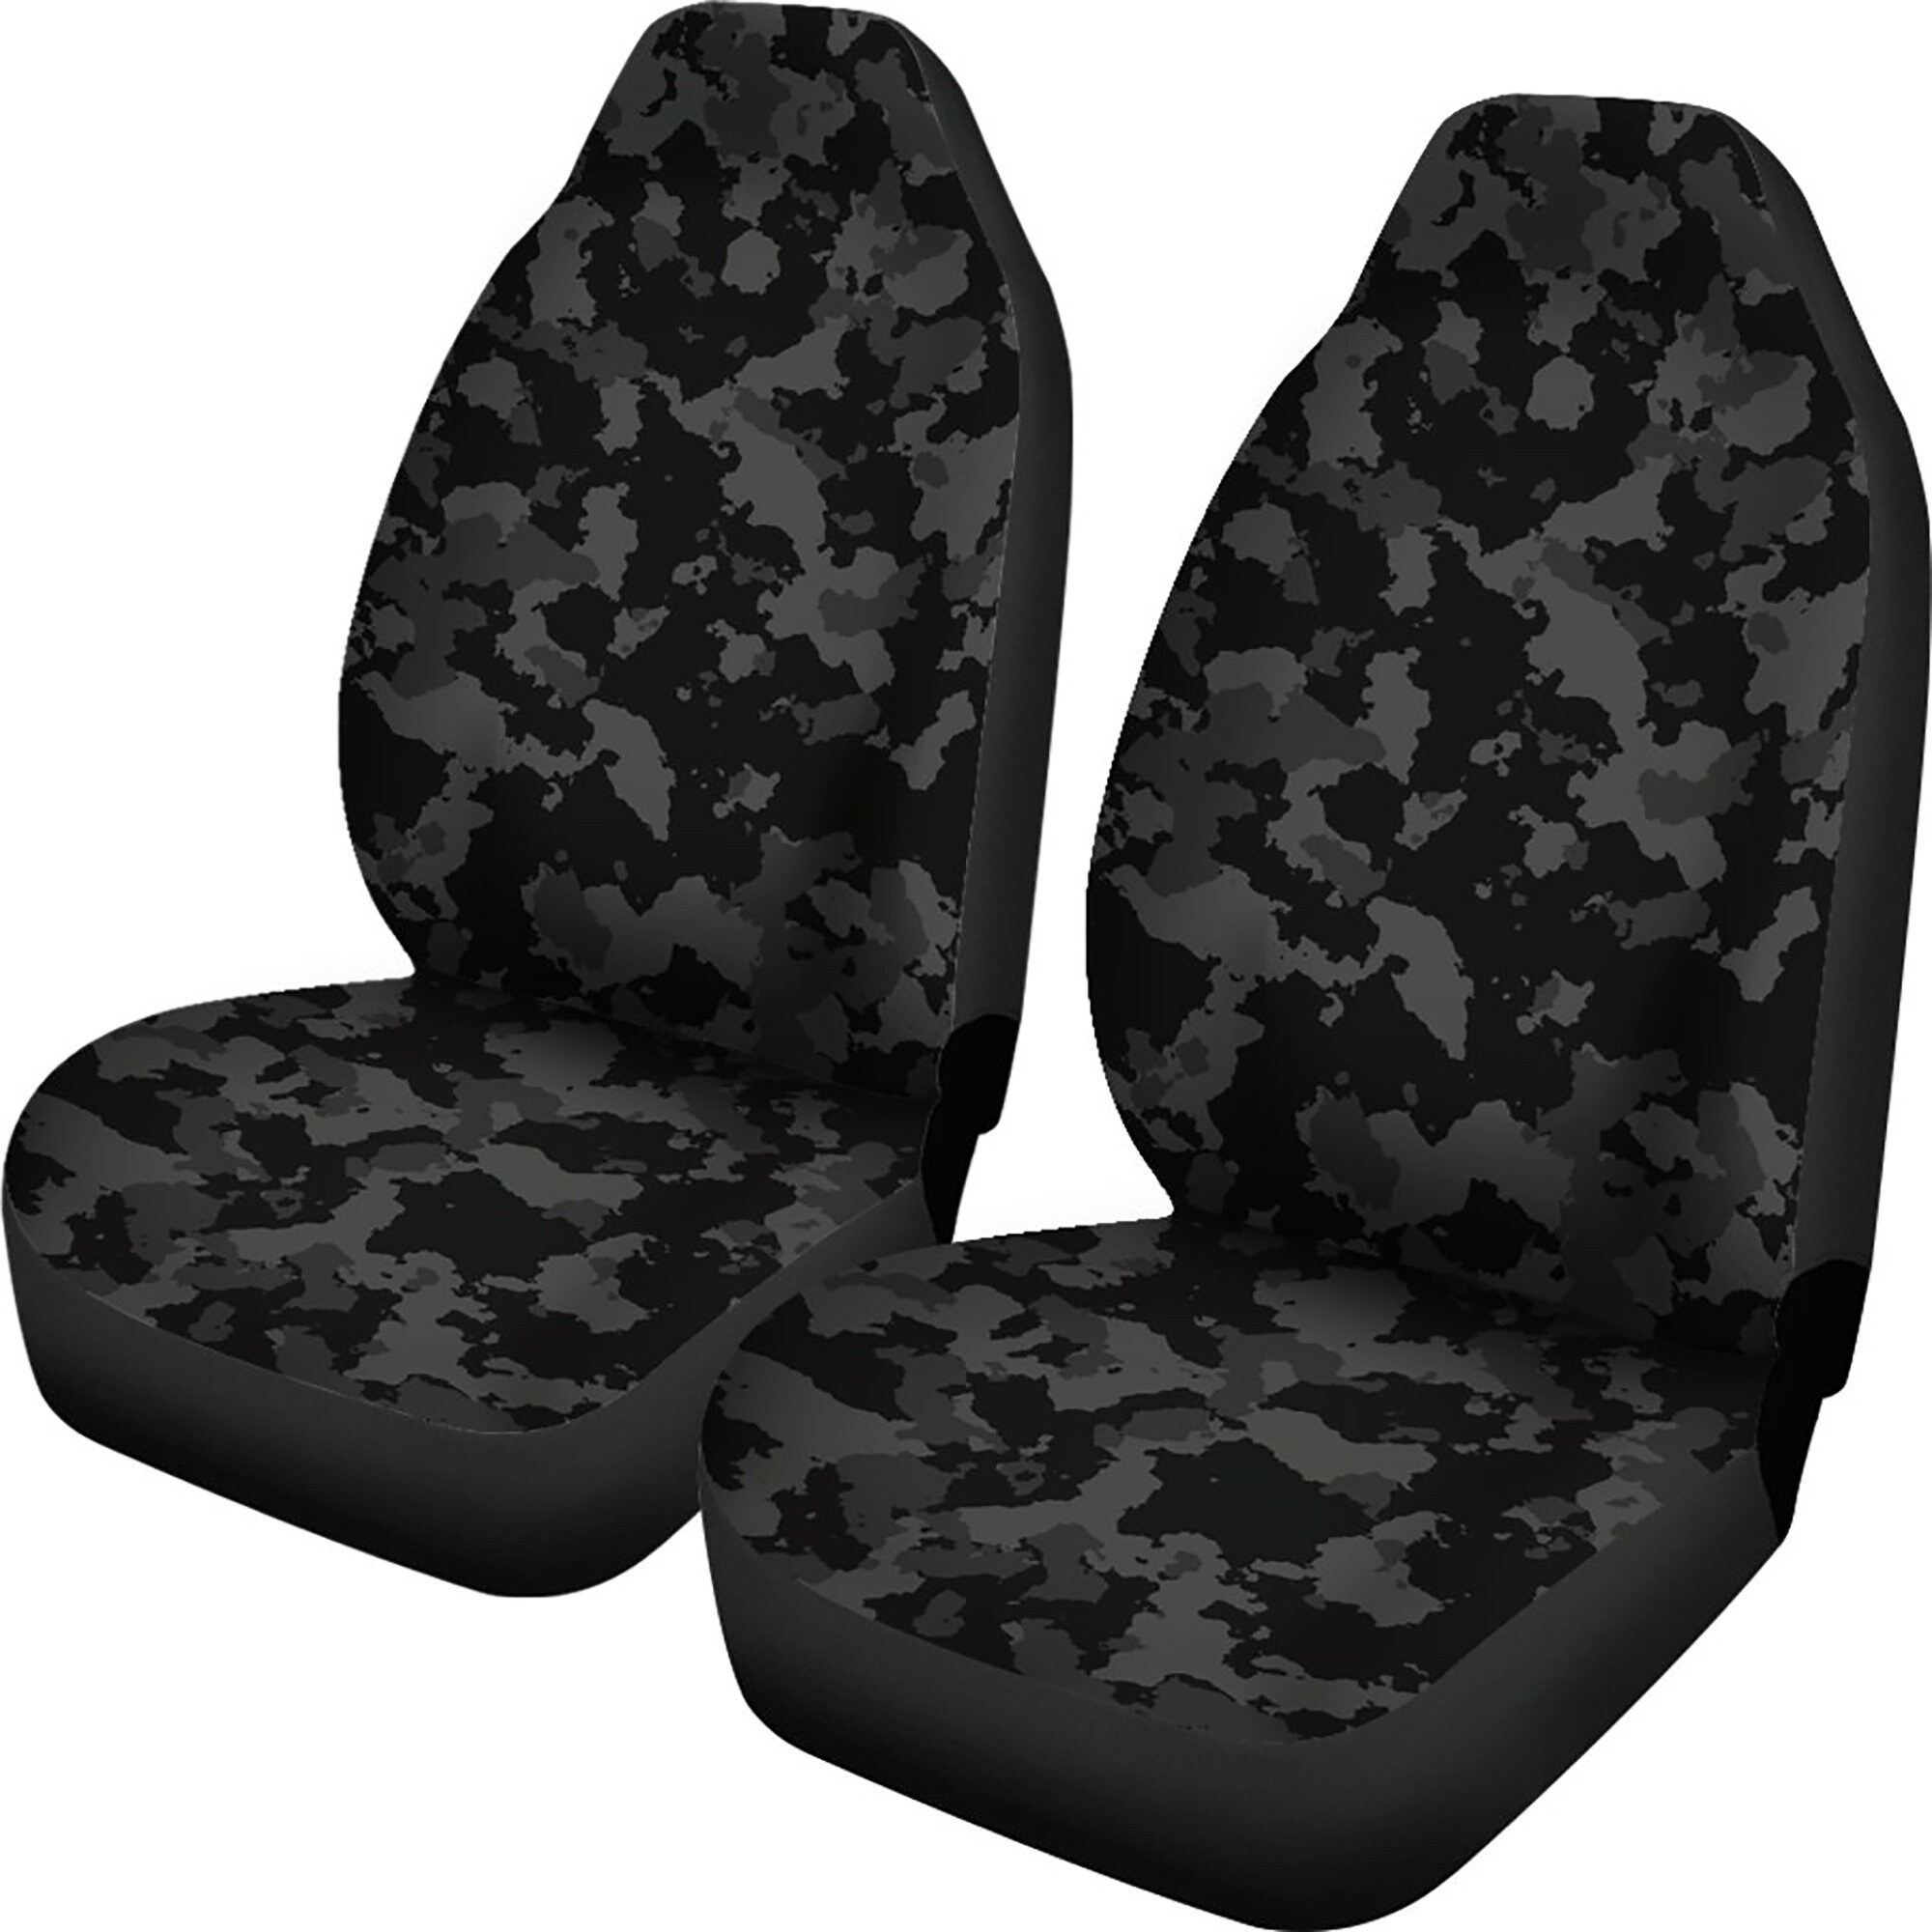 Camo Car Seat Covers Dark Gray and Black Camouflage Set of 2 Seat  Protectors Universal Fit for Car SUV Bucket Seats 